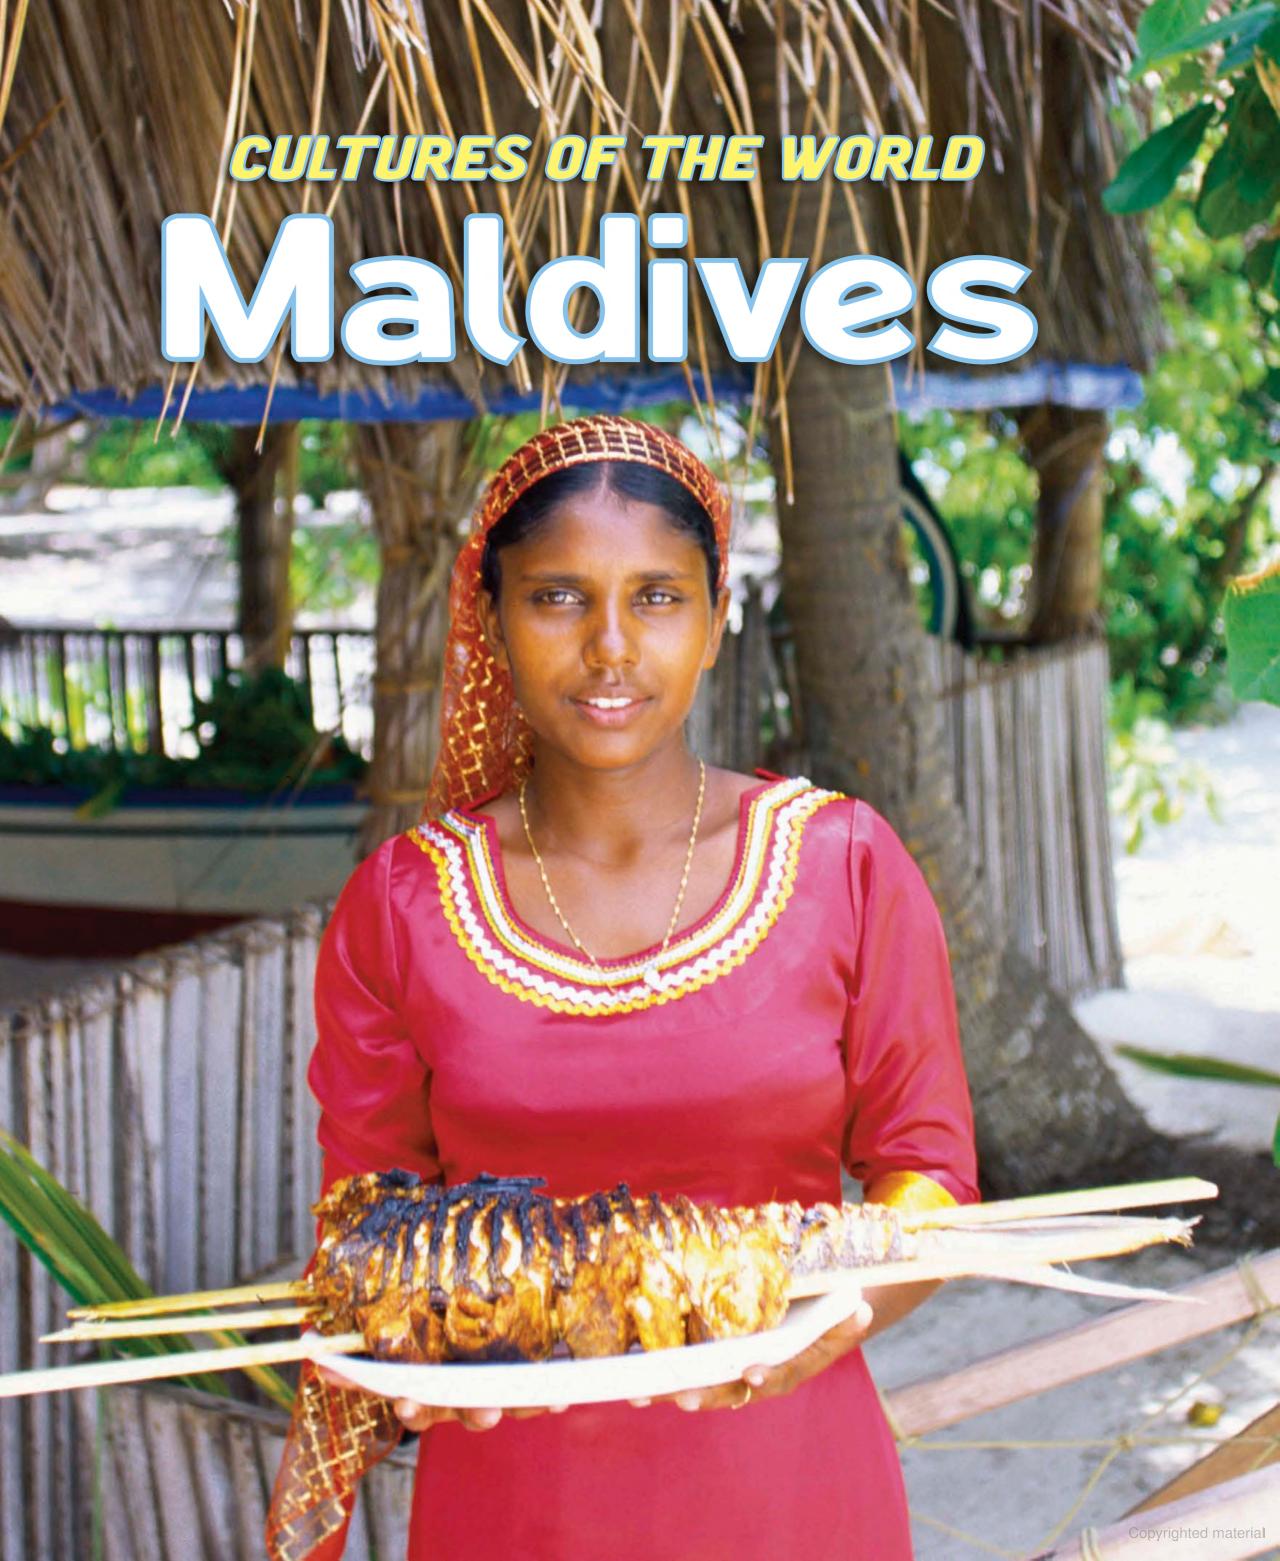 Maldives Travel Book Culture of the word Cover Maldives by Sakis Papadopoulos